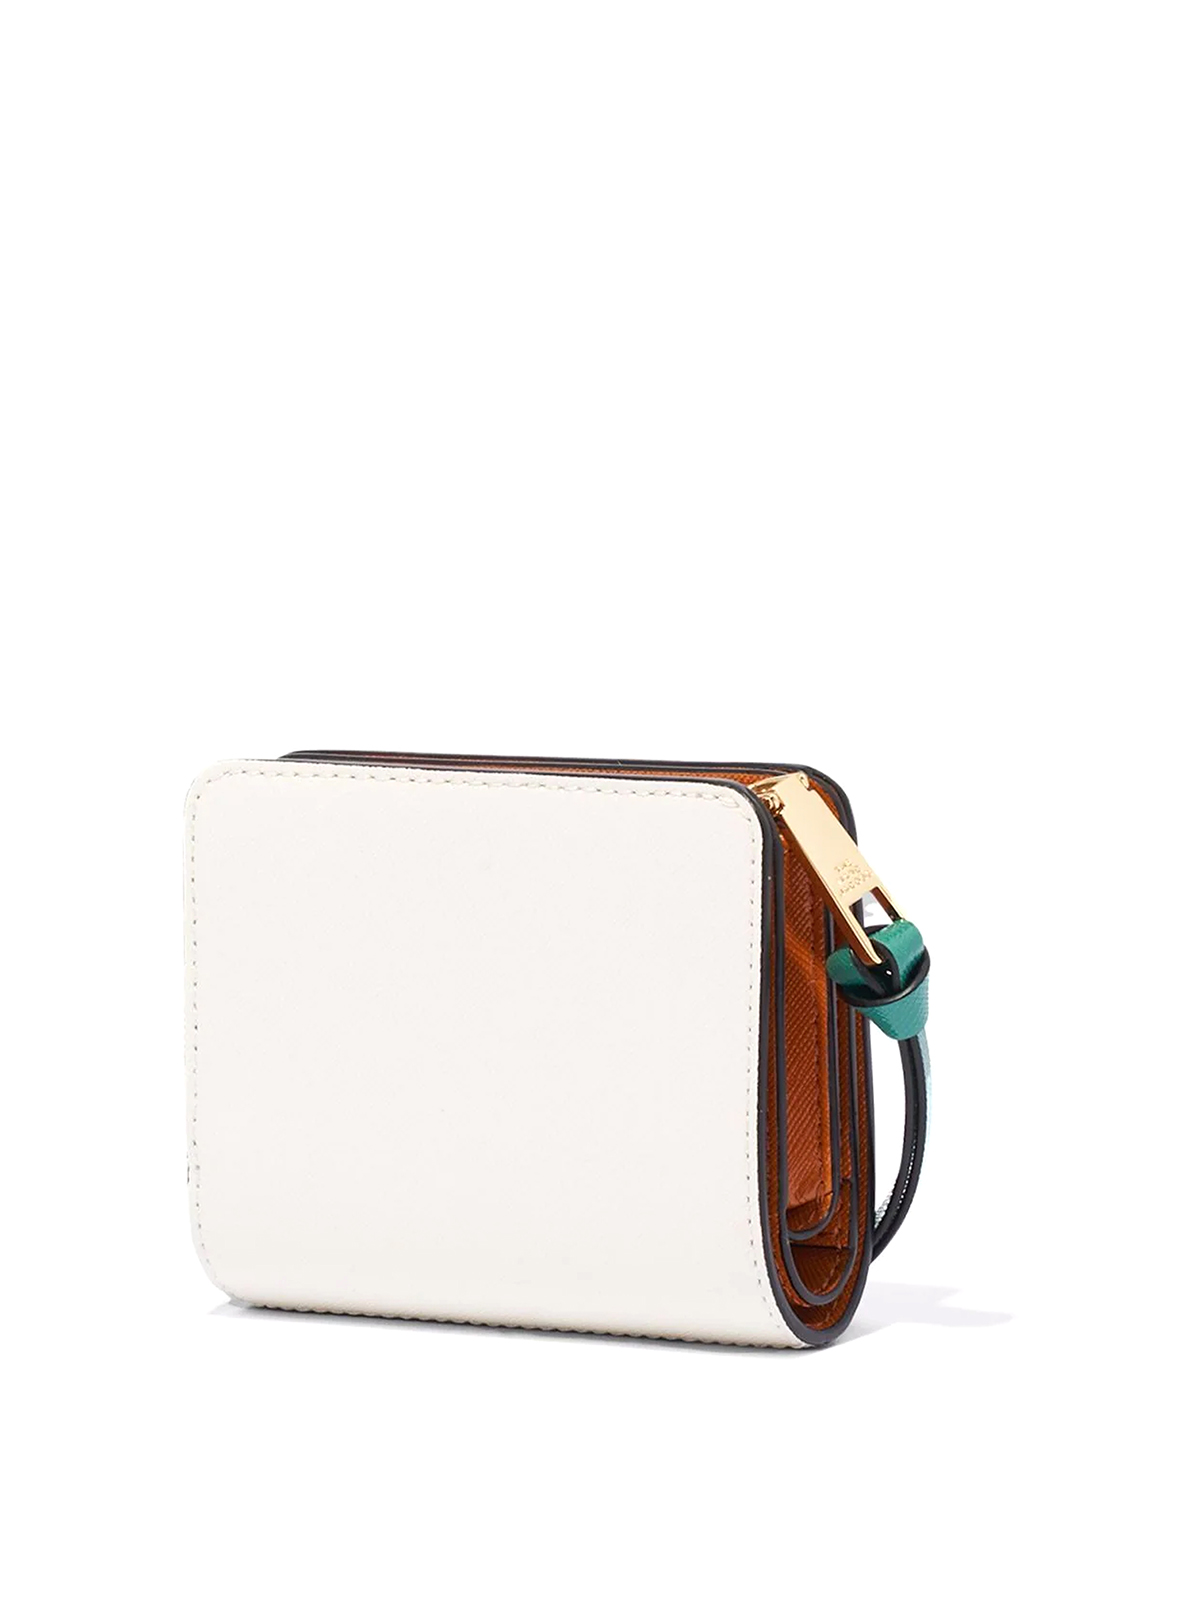 MARC JACOBS Snapshot Mini Compact Leather Wallet